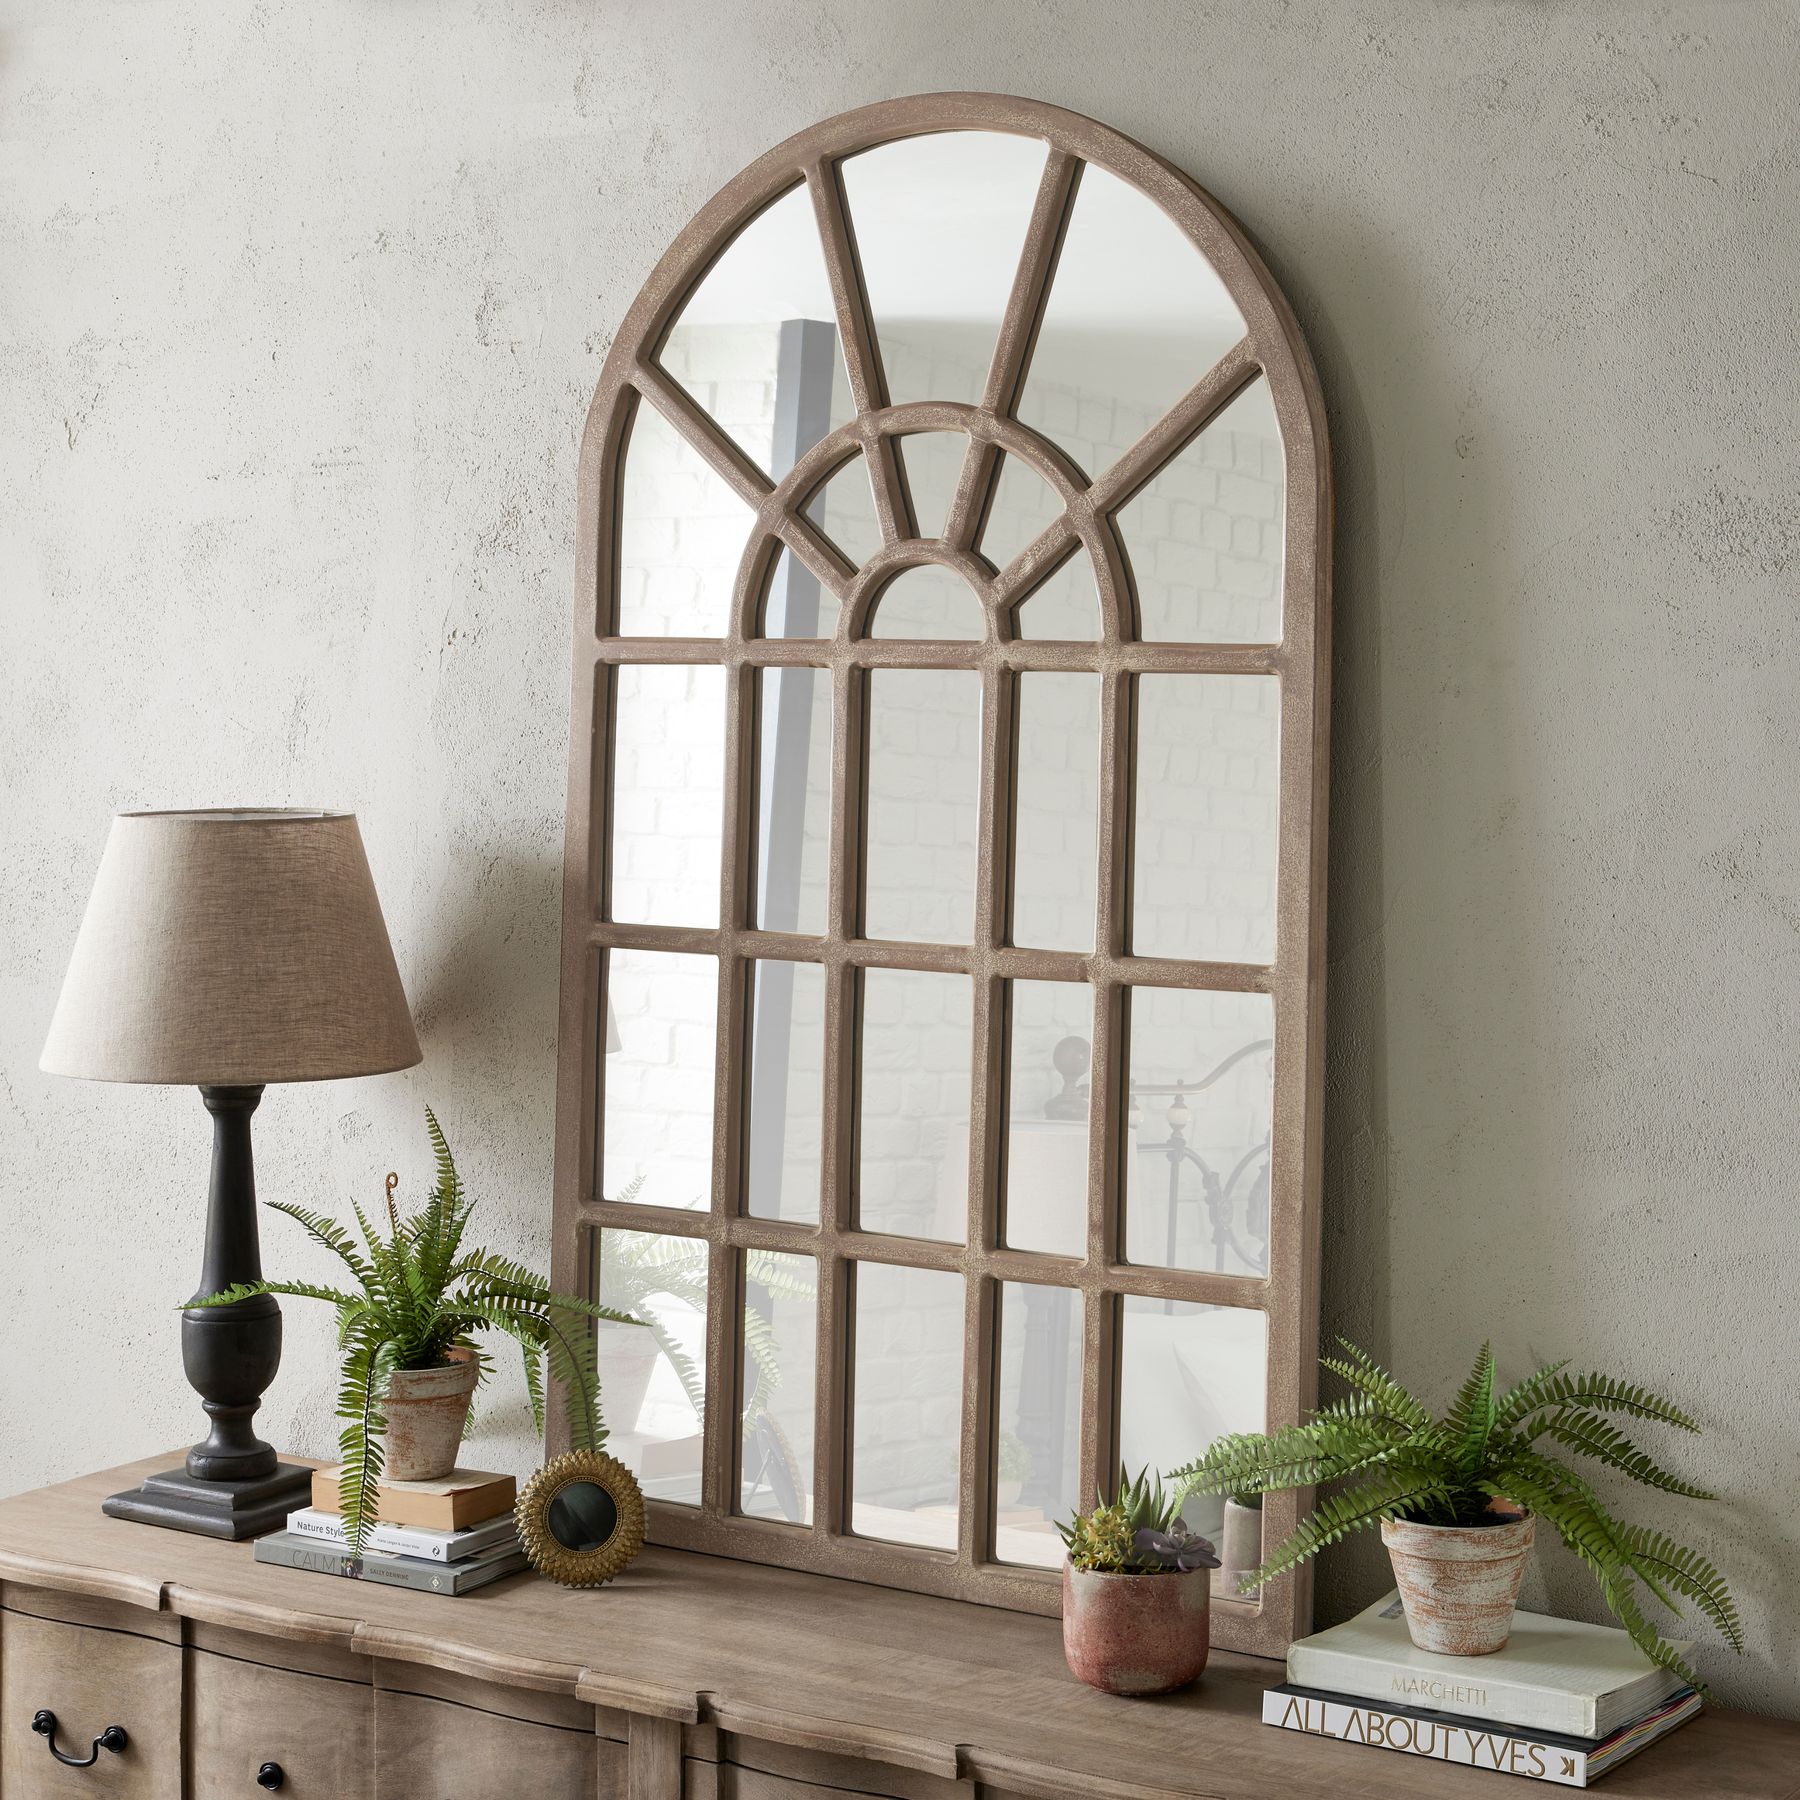 Copgrove Collection Arched Paned Wall Mirror - Image 4